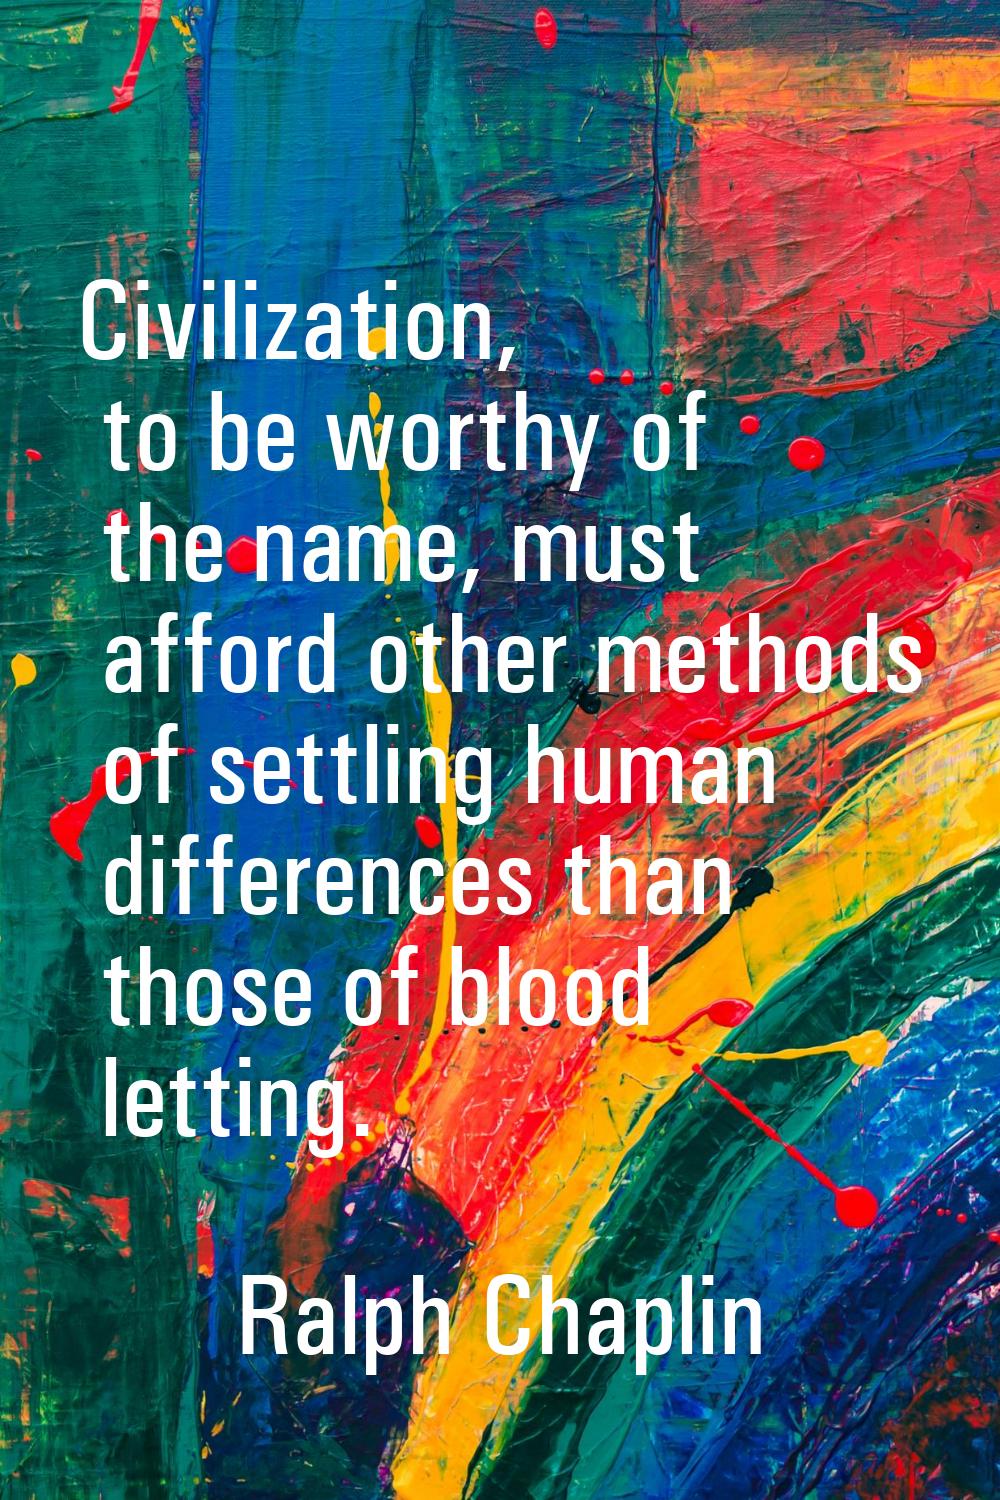 Civilization, to be worthy of the name, must afford other methods of settling human differences tha